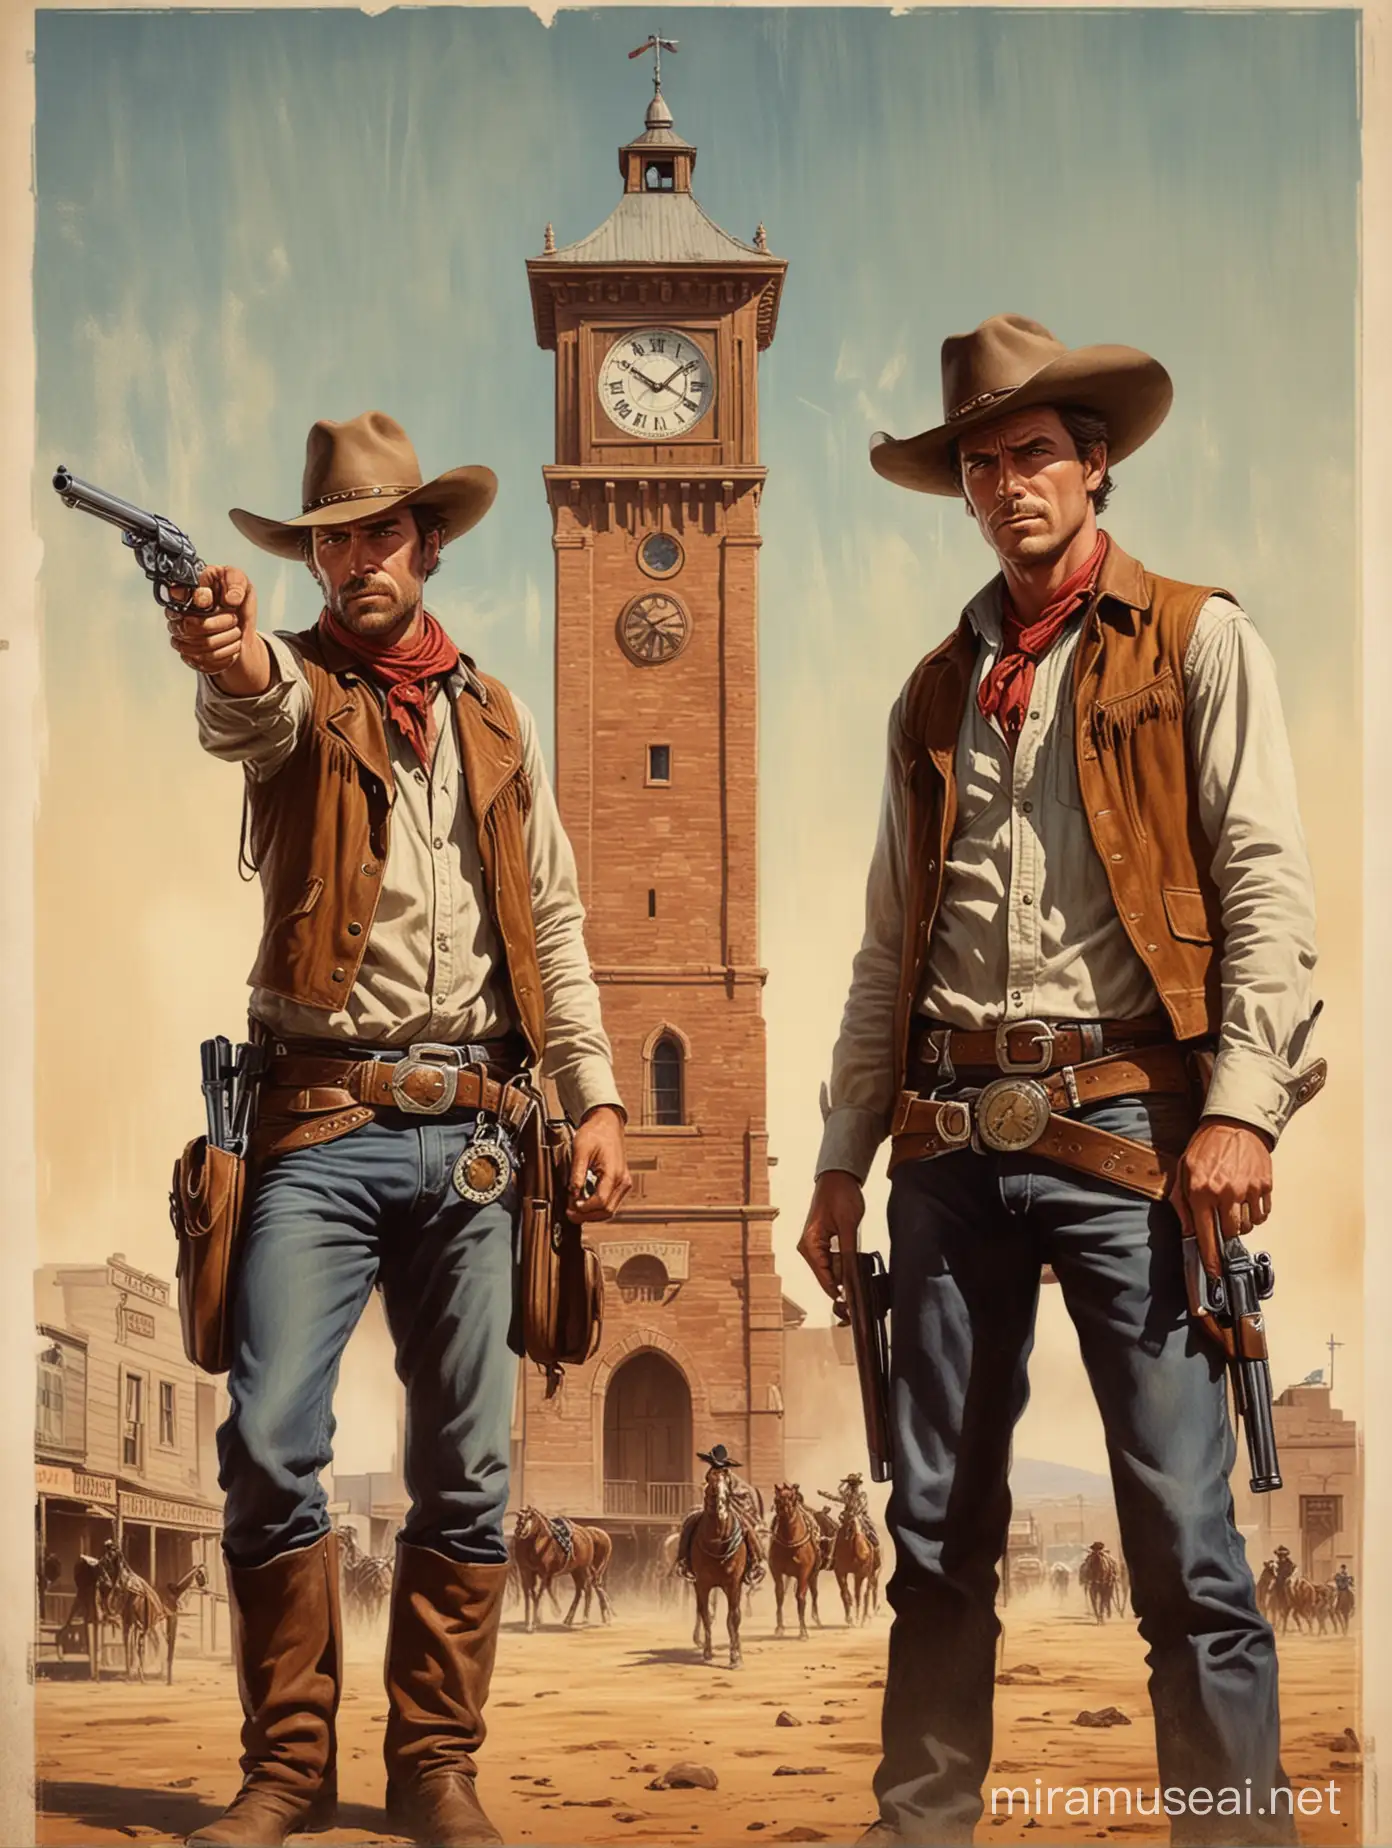 Wild West Duel at 10 PM Cowboys Face Off Under the Clock Tower